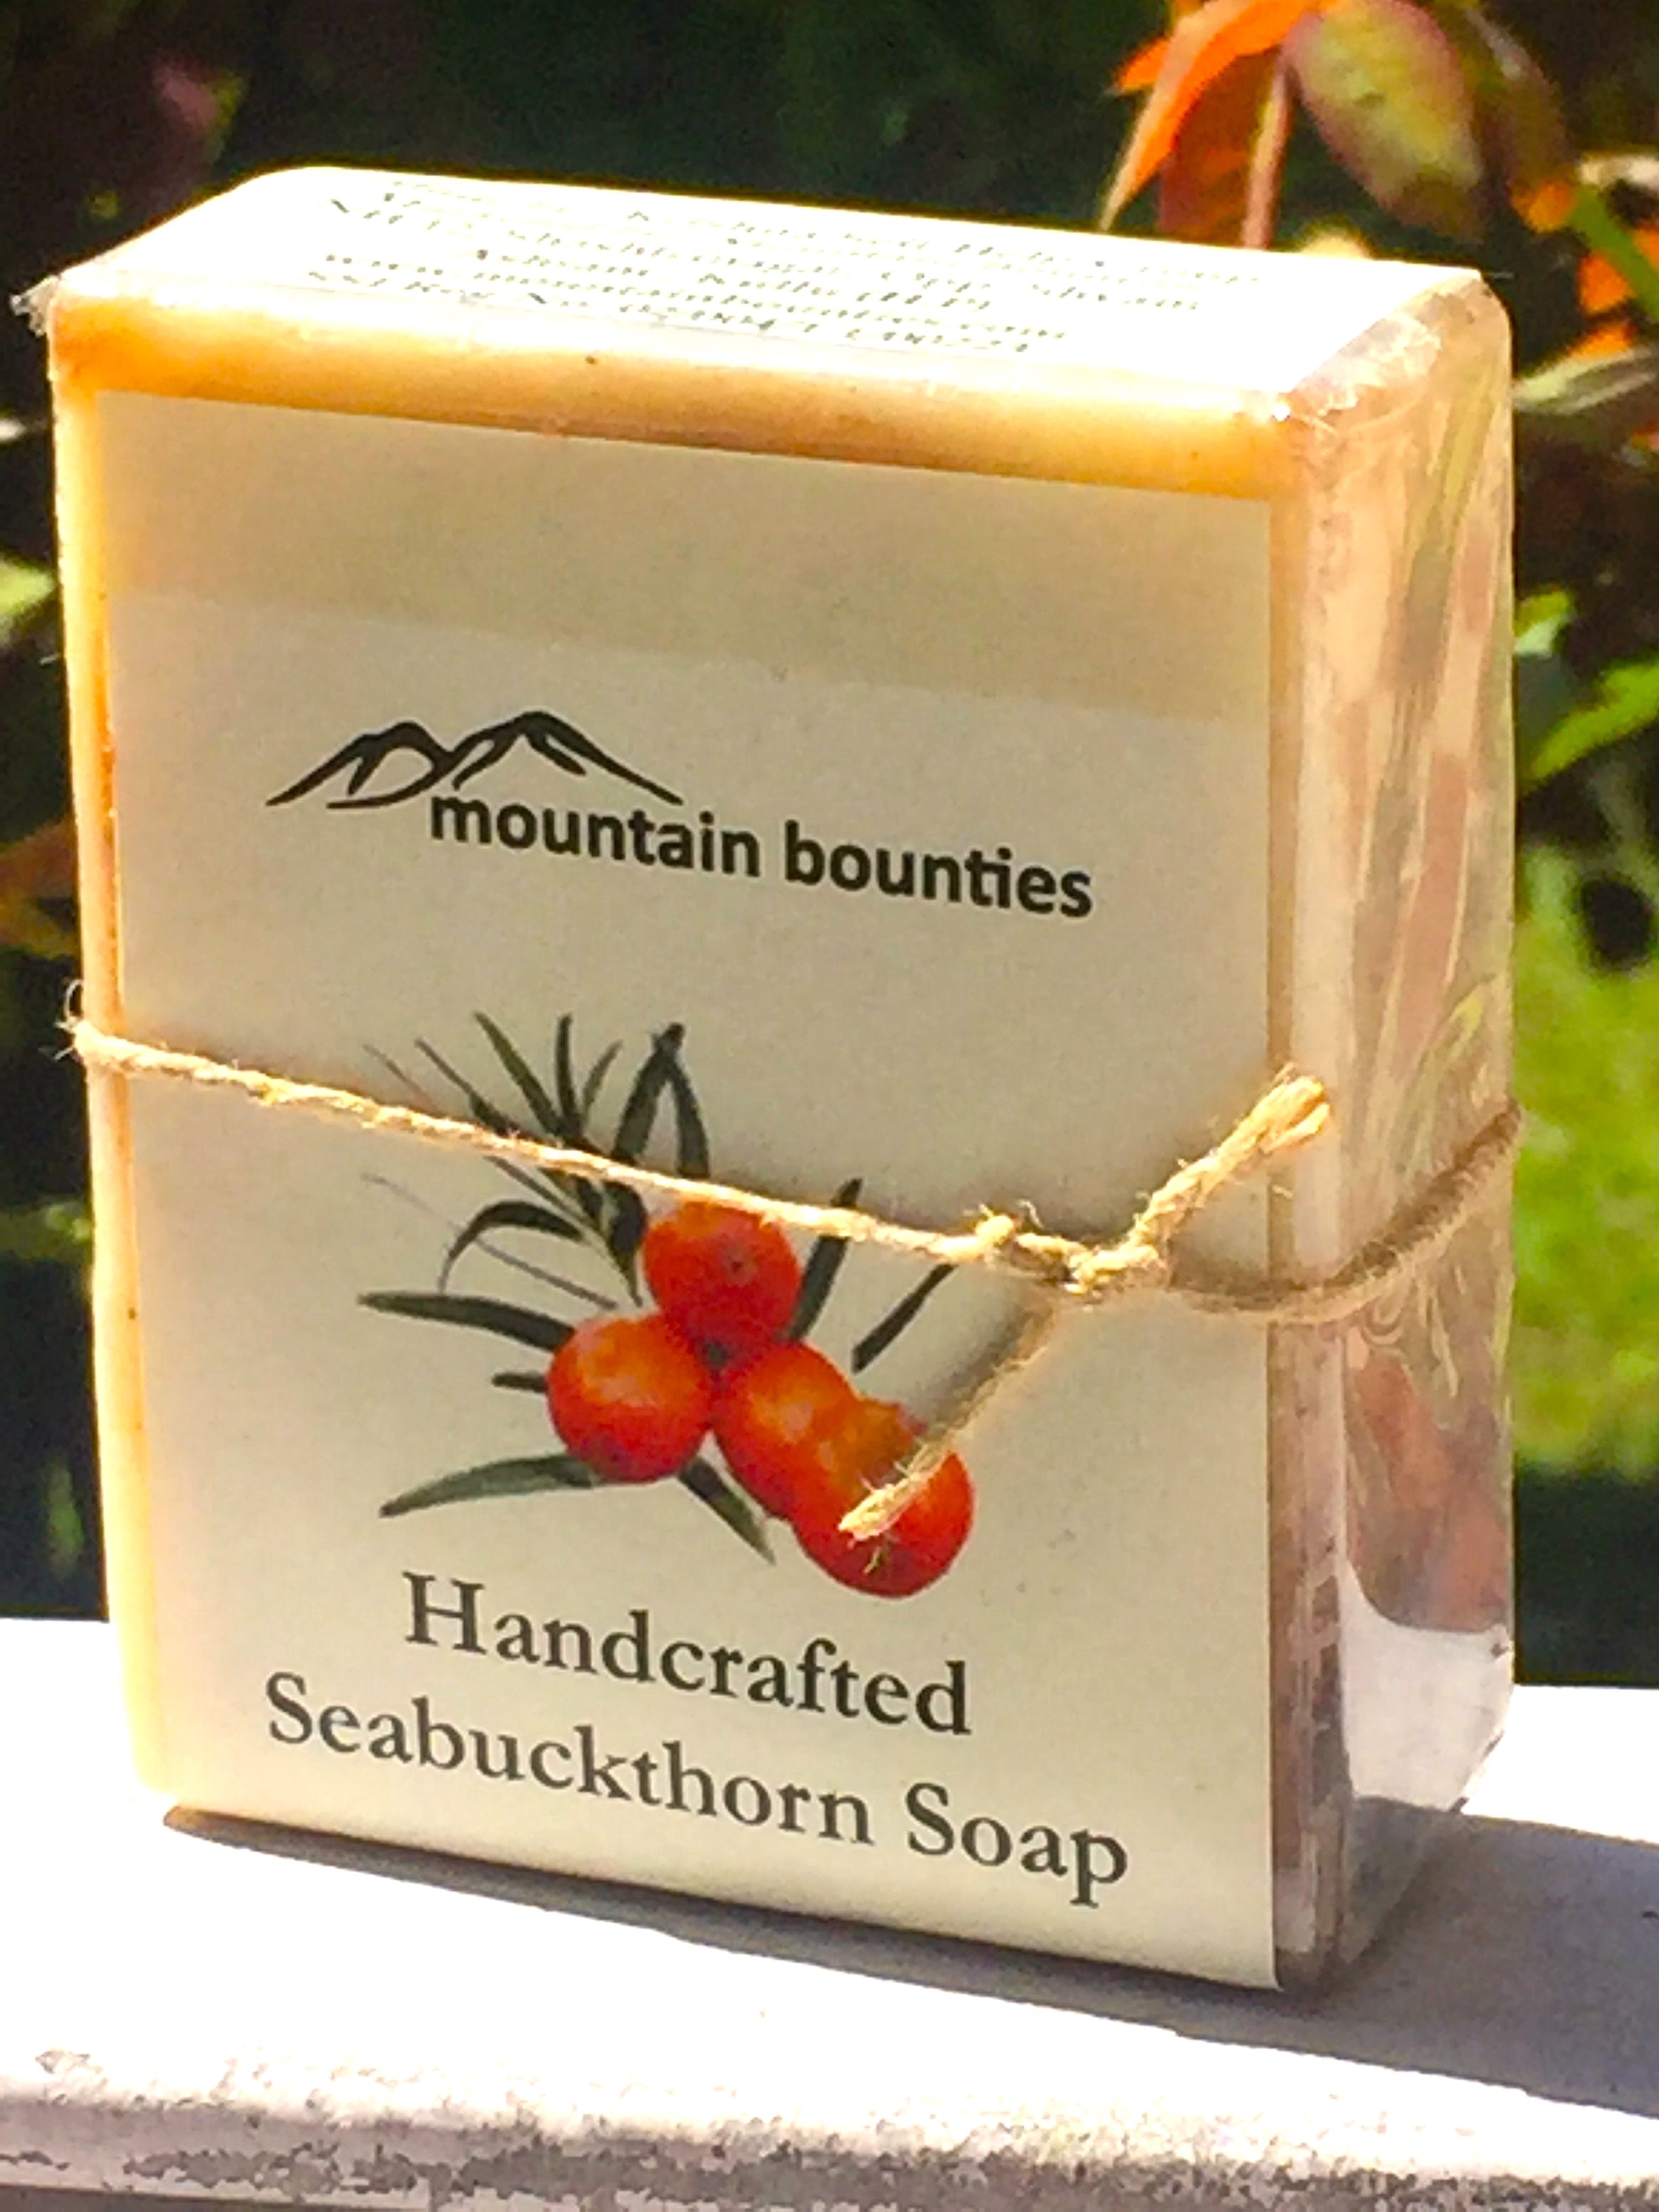 Seabuckthorn herbal soap, cold pressed, Handmade, 100% Natural, Moisturising for face, hands and hair, Recommended for prematurely aged skin, sensitive, inflamed and dry skin. Cold pressed, 100% natural, handmade, Natural Skin Care, Natural oils, Skin Care, Himachal Oils, Himalayan Salt, Mountain Bounties, Himalayan people Care, Cold Pressed